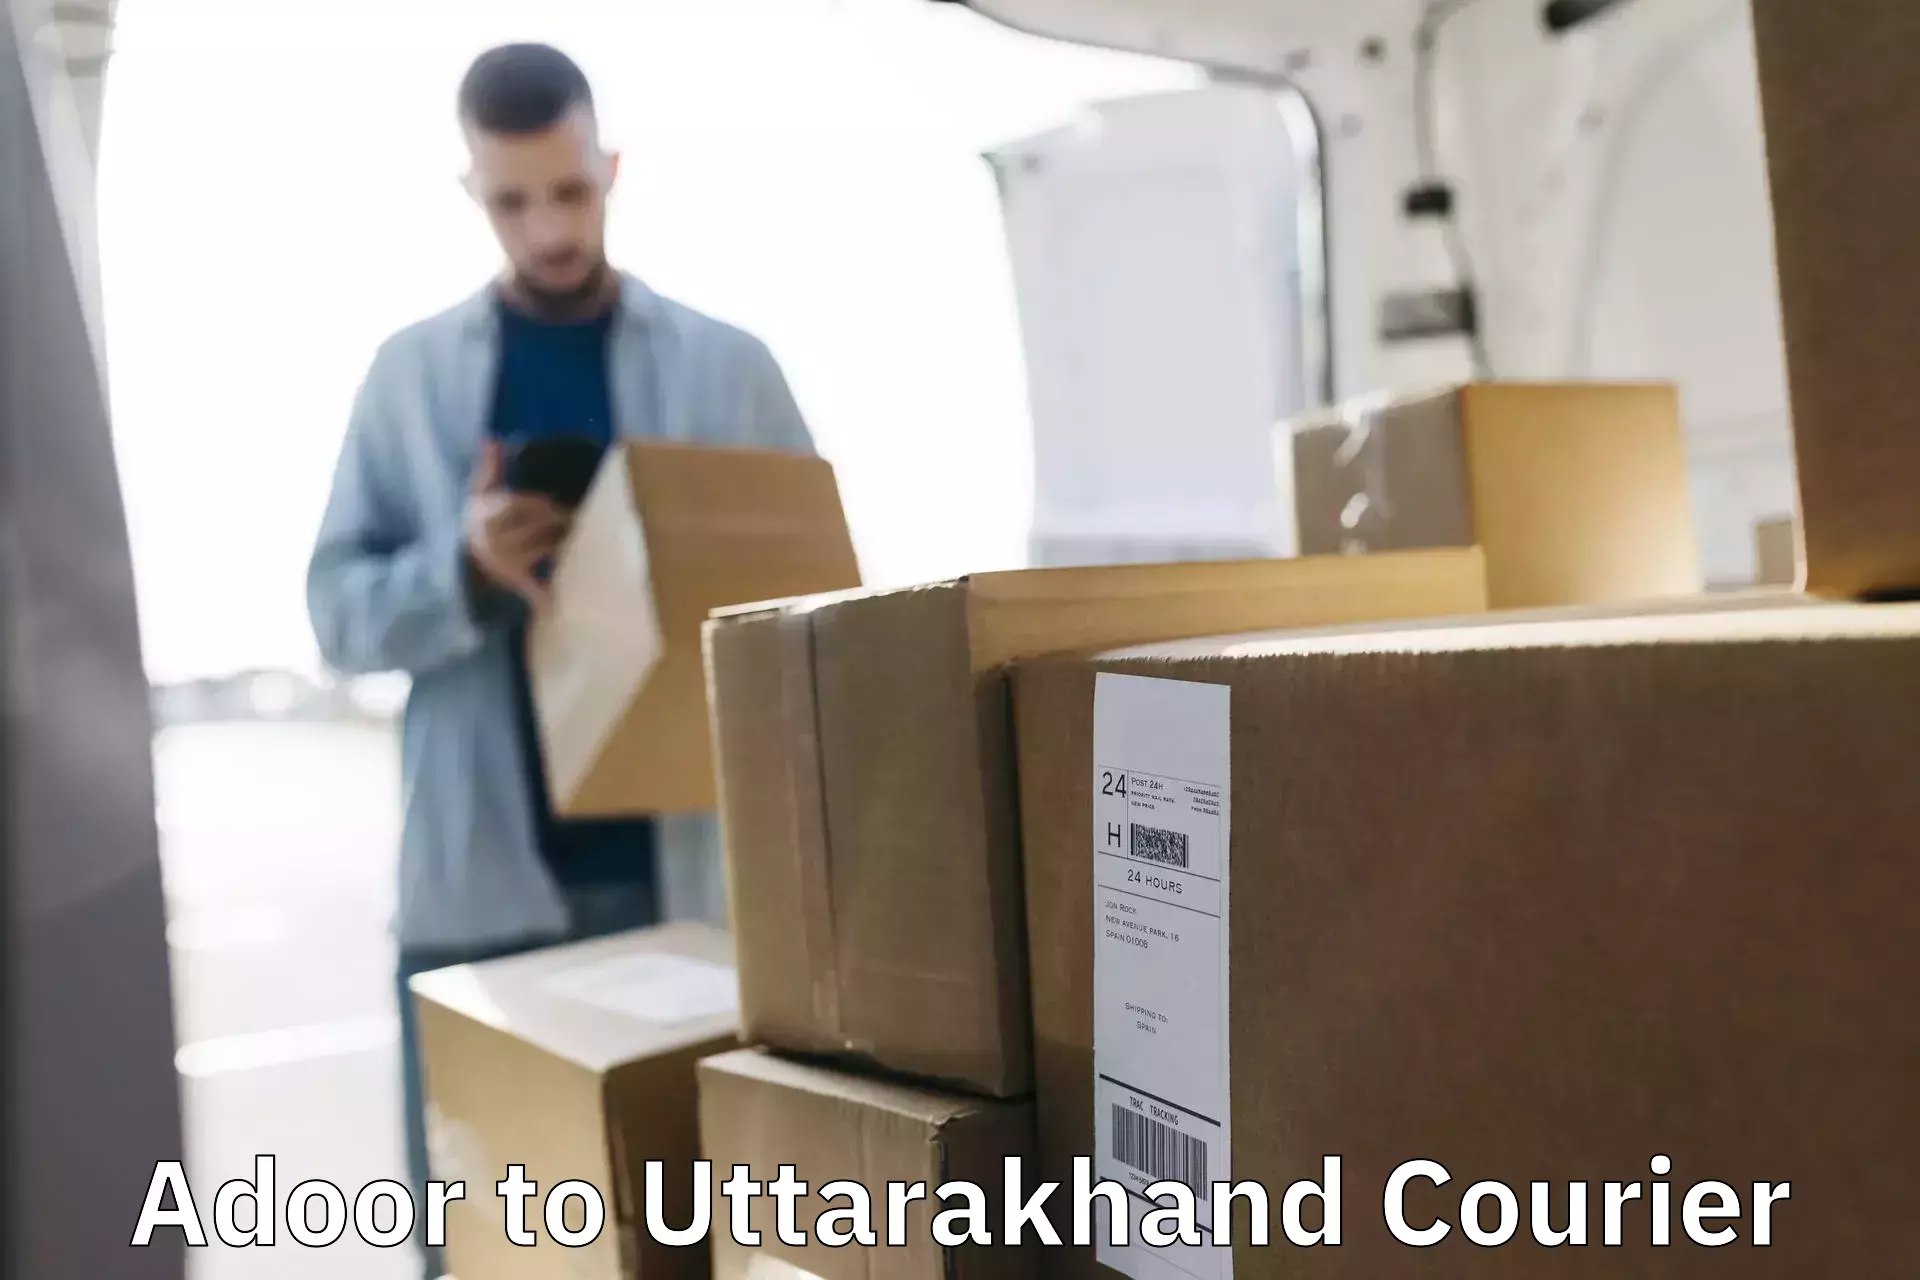 Expedited shipping methods Adoor to Bhagwanpur